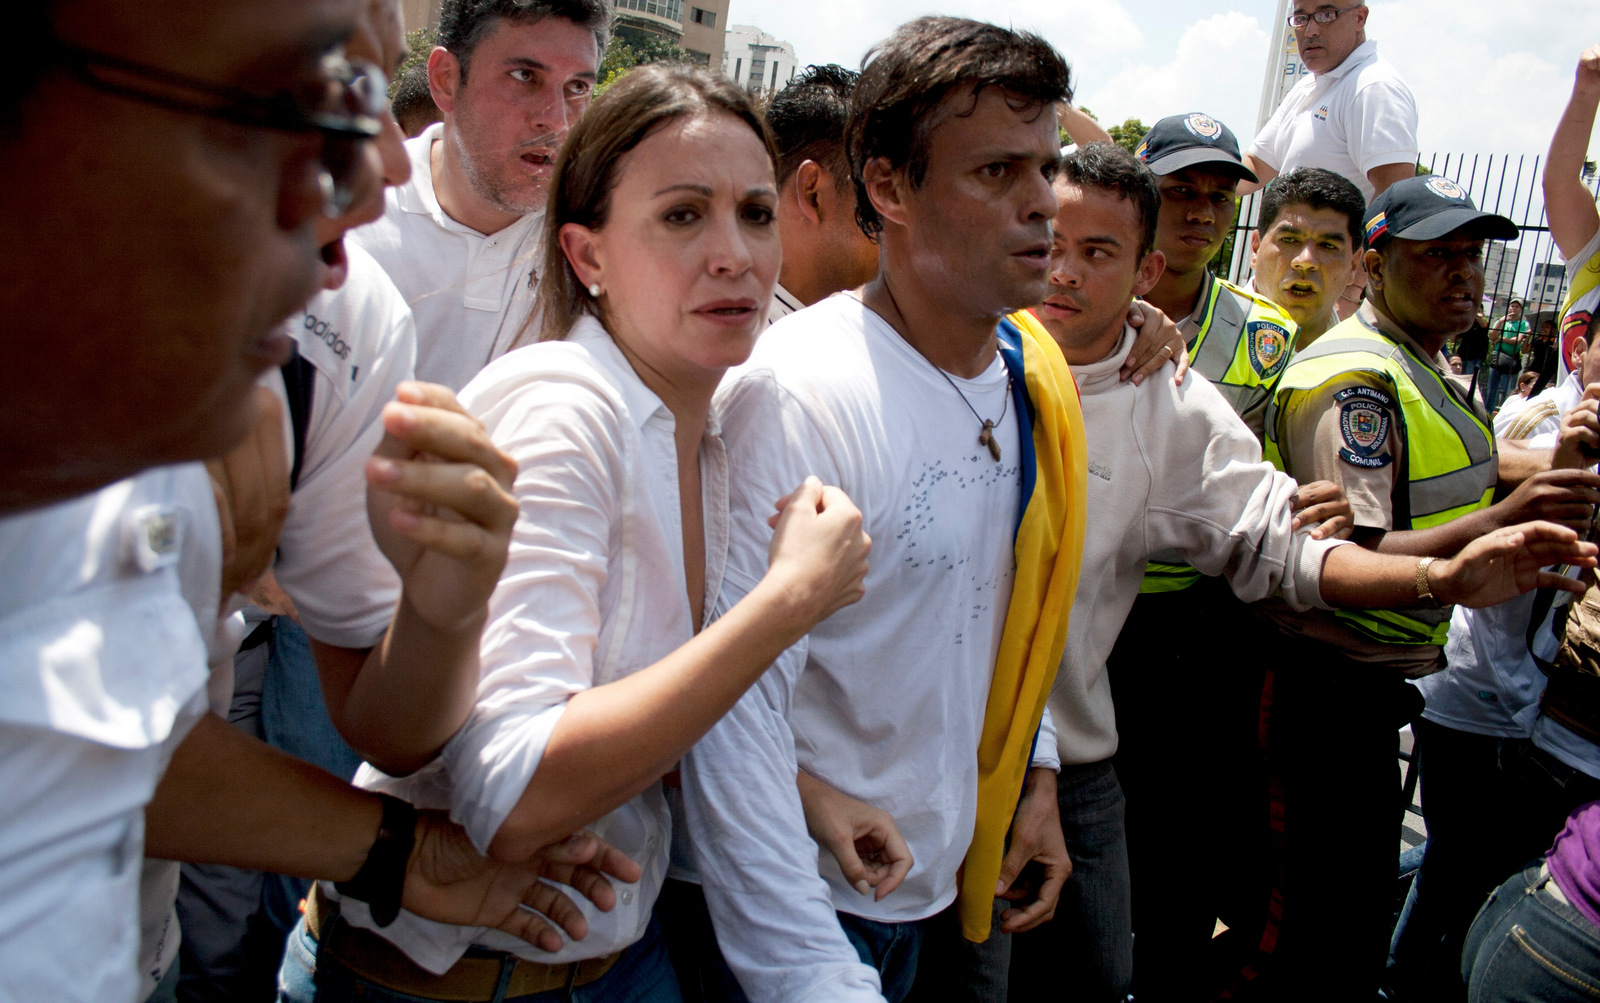 In this Feb 18, 2014 photo, Venezuelan congresswoman Maria Corina Machado, left, and Leopoldo Lopez, center, are surrounded by anti-government demonstrators before Lopez surrenders to national guards, in Caracas, Venezuela. For many Venezuelans, the opposition's two highest profile leaders, former presidential candidate Henrique Capriles and the jailed Leopoldo Lopez, are still viewed as part of an elite detached from the working class life. (AP/Juan Manuel Hernandez)